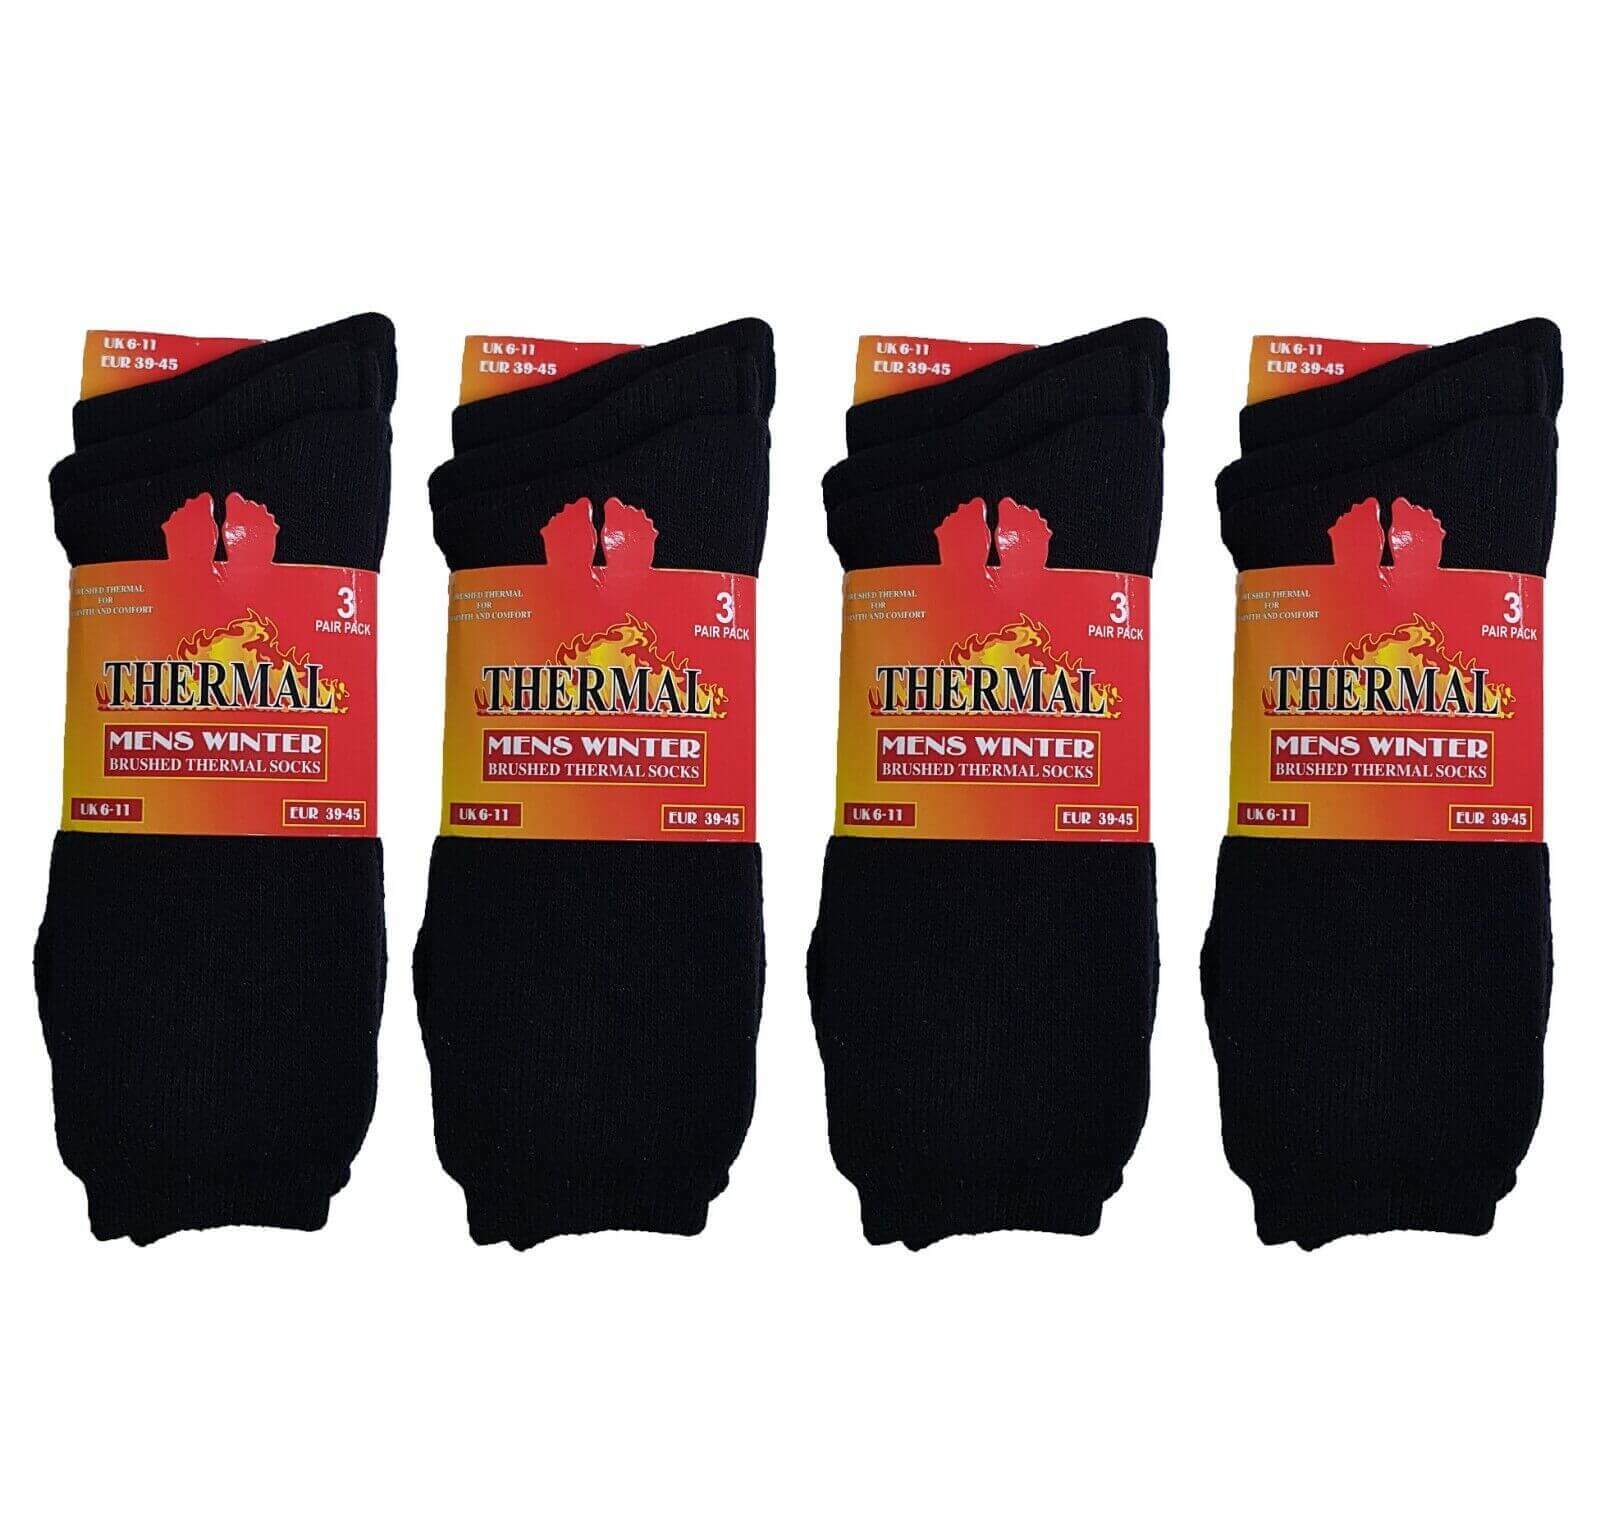 Ultimate 12 Pairs Men's Black Thermal Socks Thick Warm Work Boot Socks. Buy now for £10.00. A Socks by Sock Stack. 6-11, athletics, black, boot, boys, comfortable, cosy, home, mens, outdoor, school, socks, sports, thermal, Ultimate, warm.